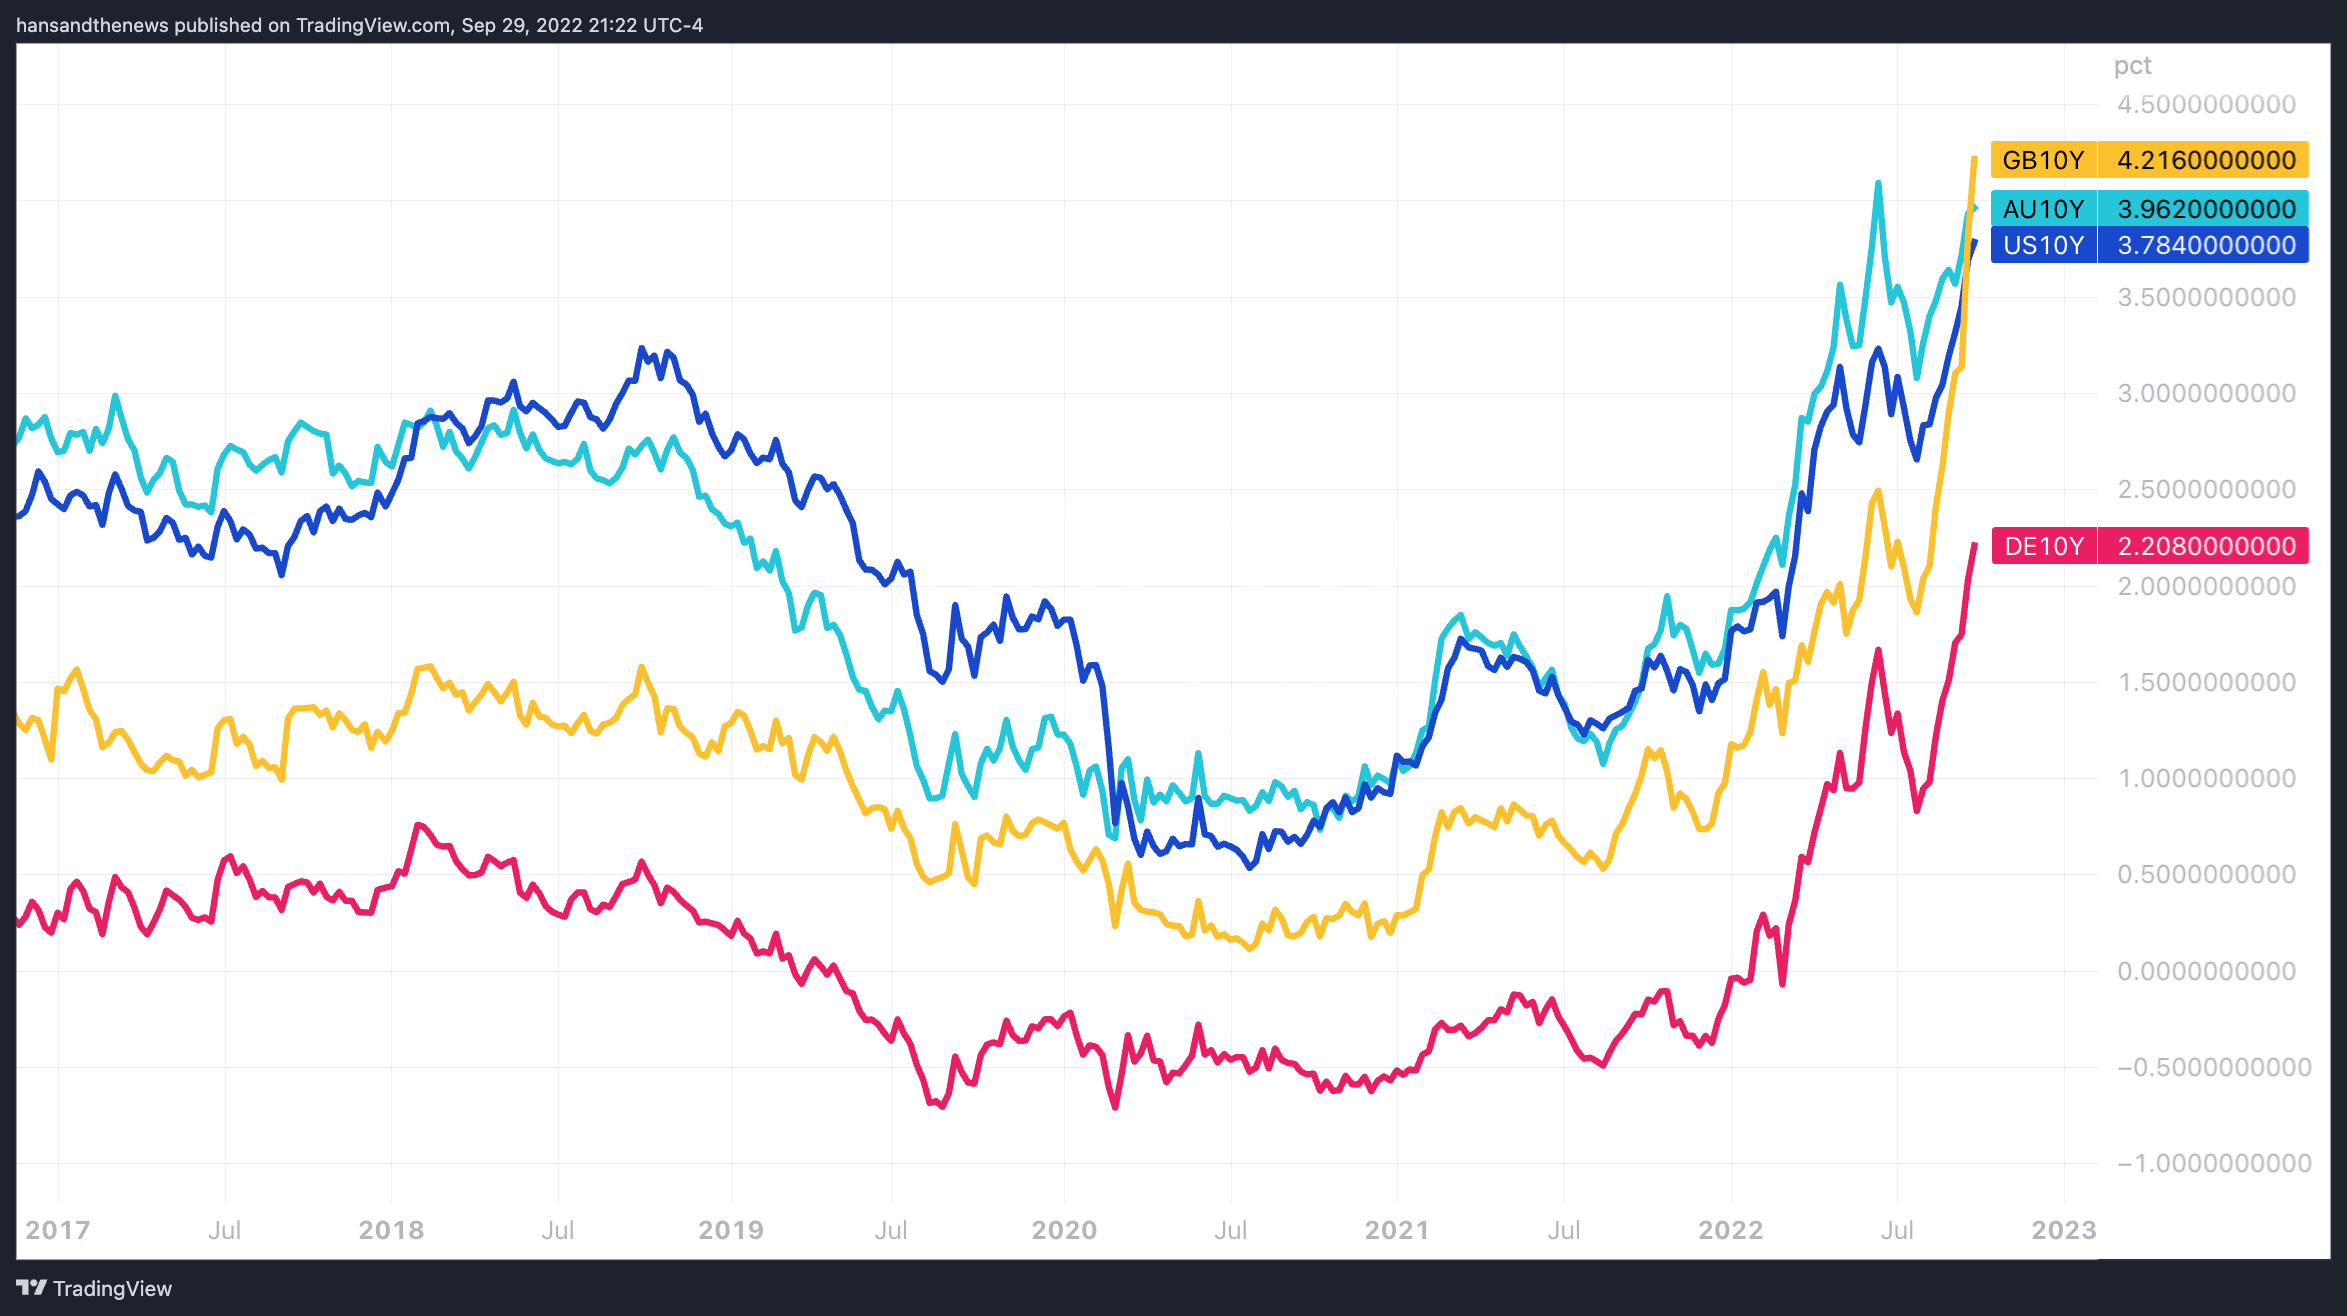 The 10-year yields from the UK, US, Germany, and Australia. (Source: Trading View)